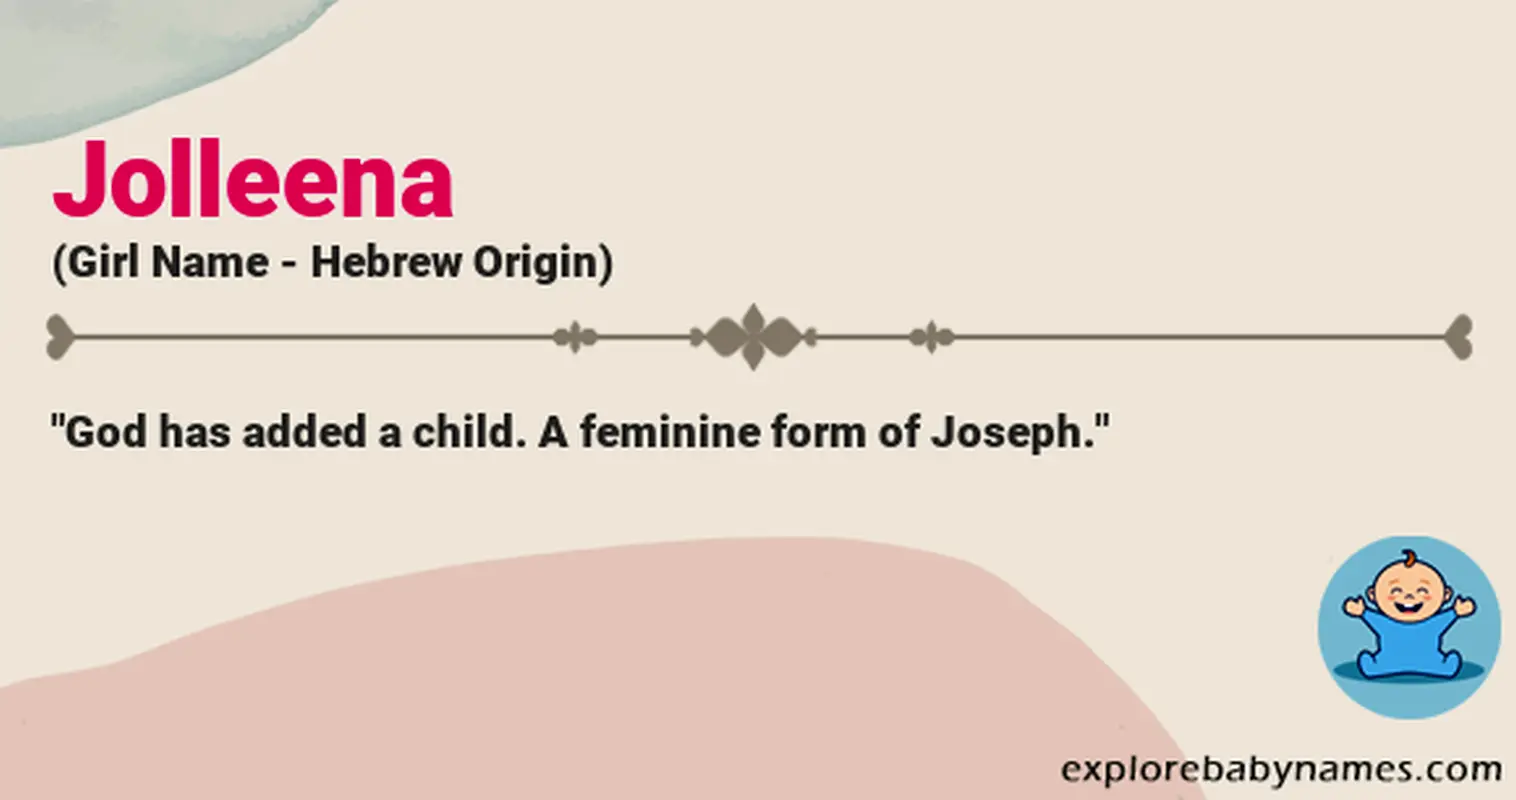 Meaning of Jolleena